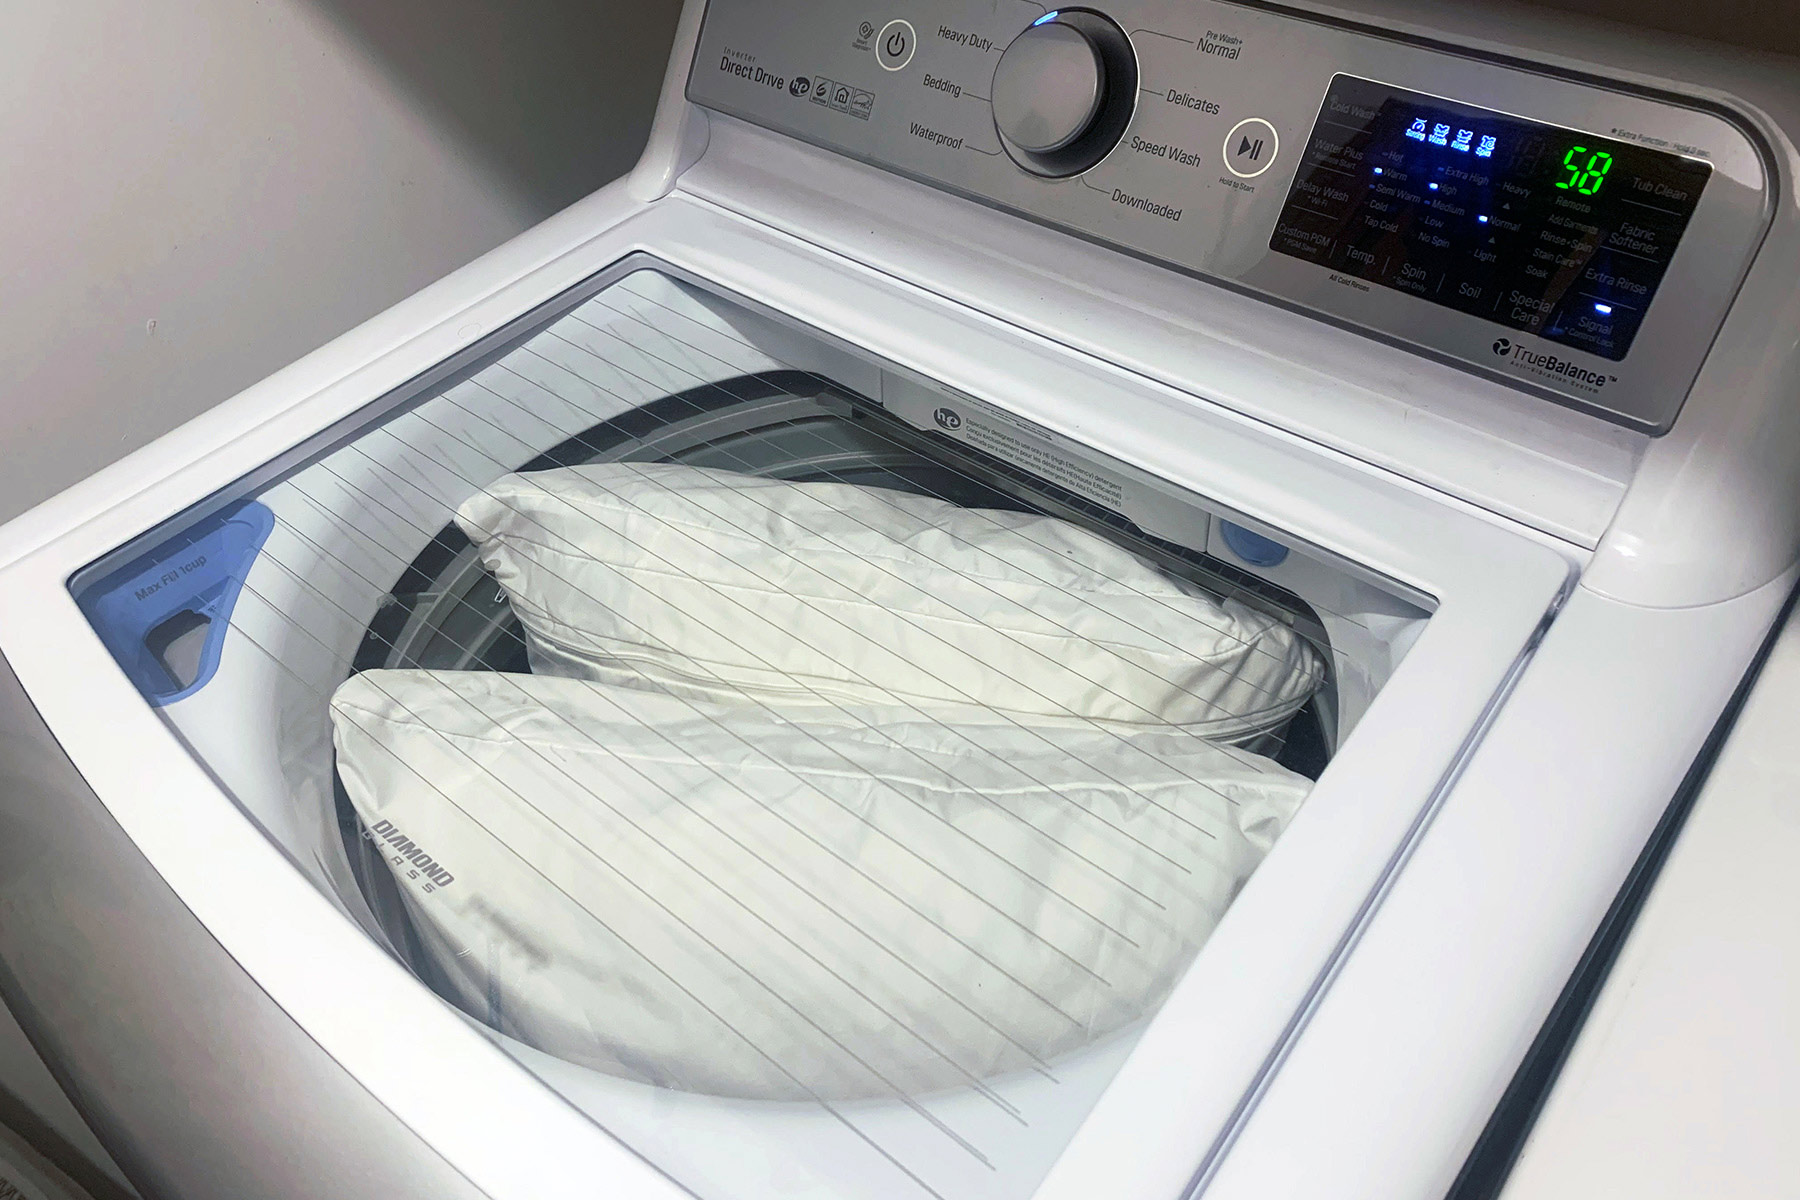 Putting Pillows In Washer